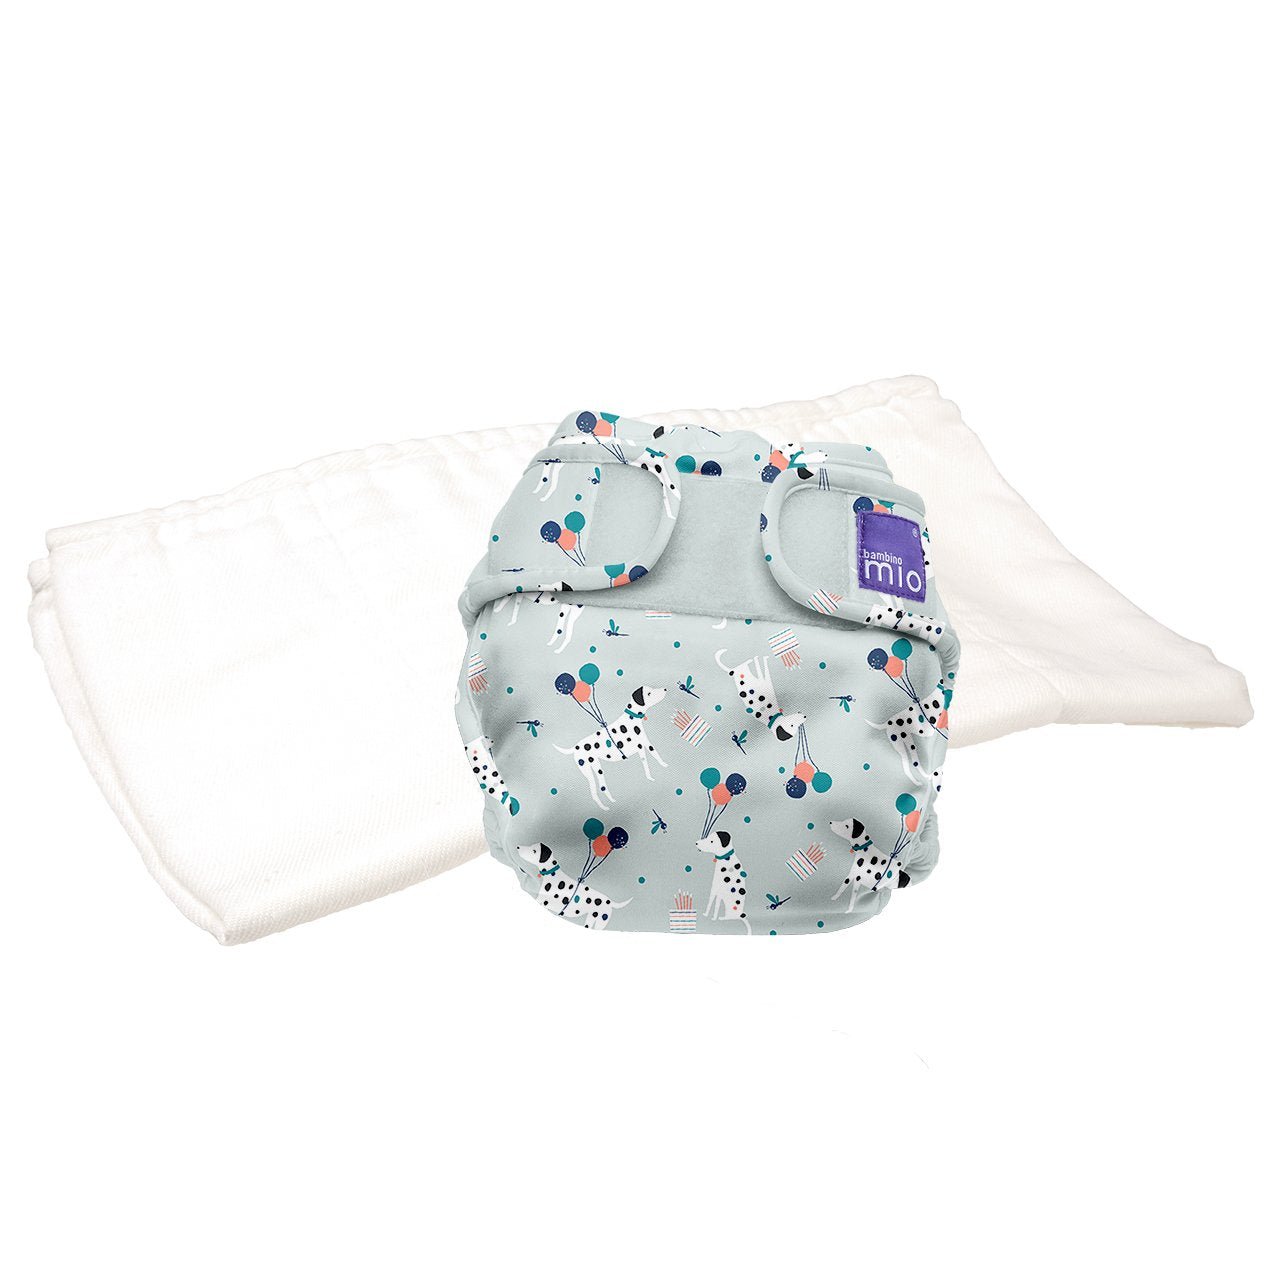 Bambino MioMioduo Two-Piece NappySize: Size 1Colour: Puppy Partyreusable nappiesEarthlets